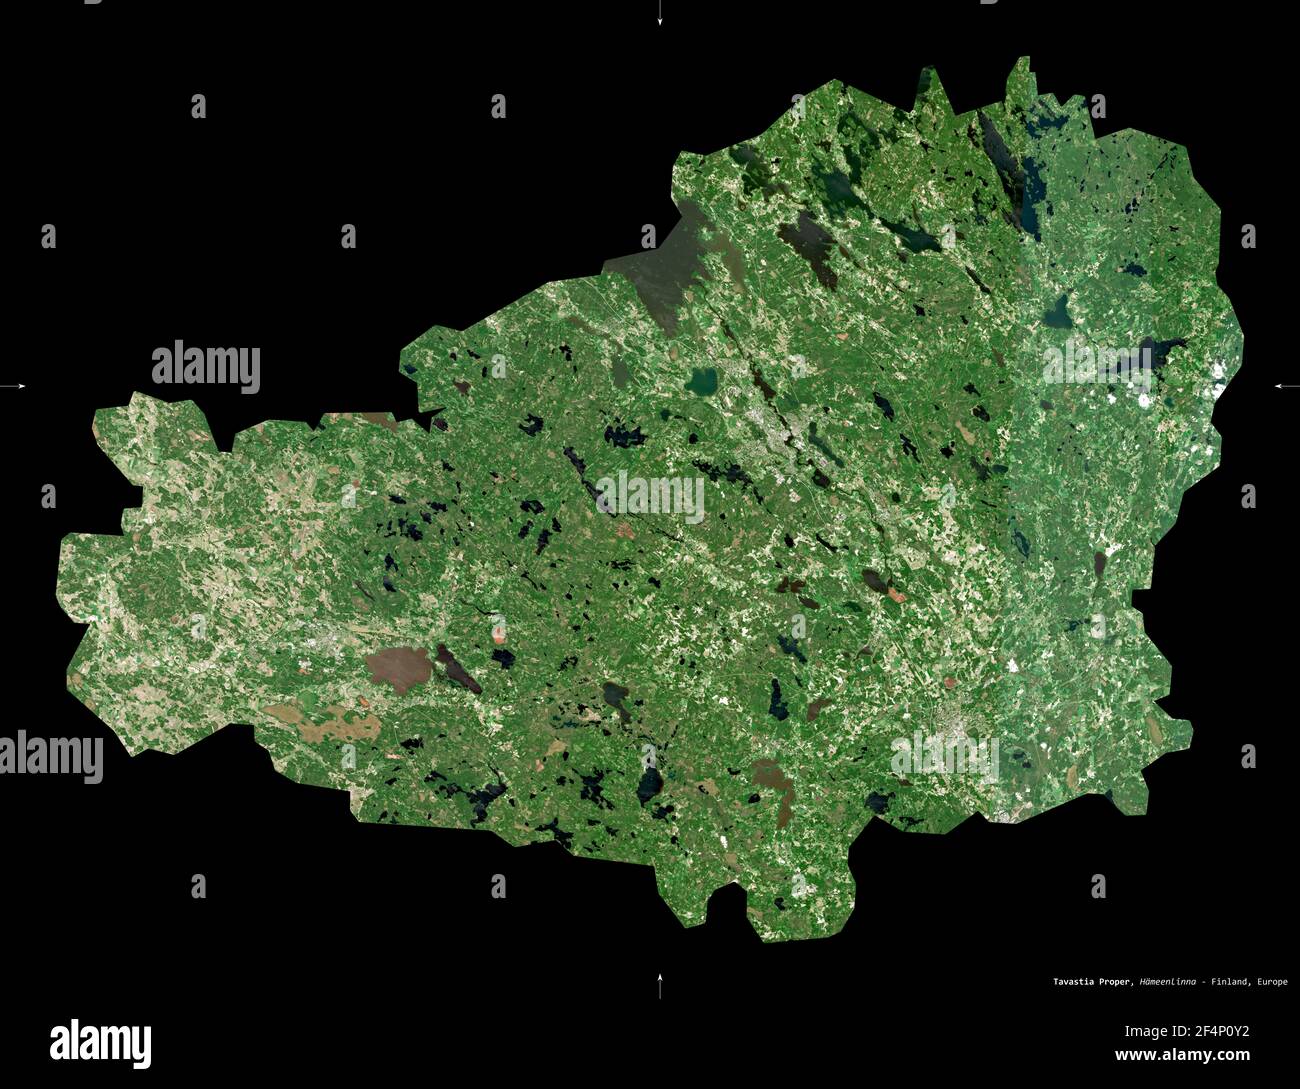 Tavastia Proper, region of Finland. Sentinel-2 satellite imagery. Shape isolated on black. Description, location of the capital. Contains modified Cop Stock Photo